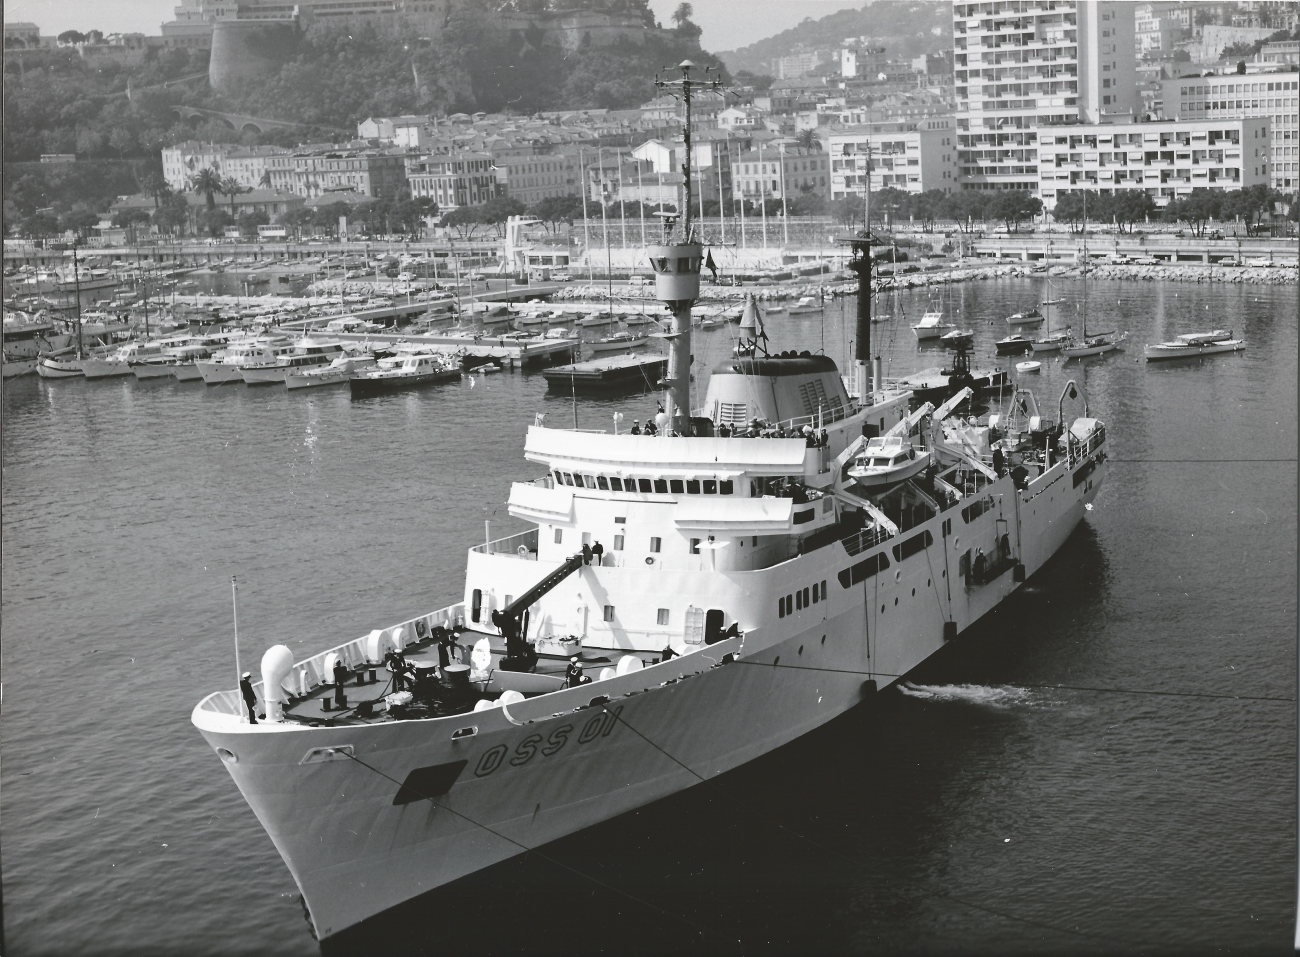 The USC&GS; OCEANOGRAPHER being secured to the pier at Monaco